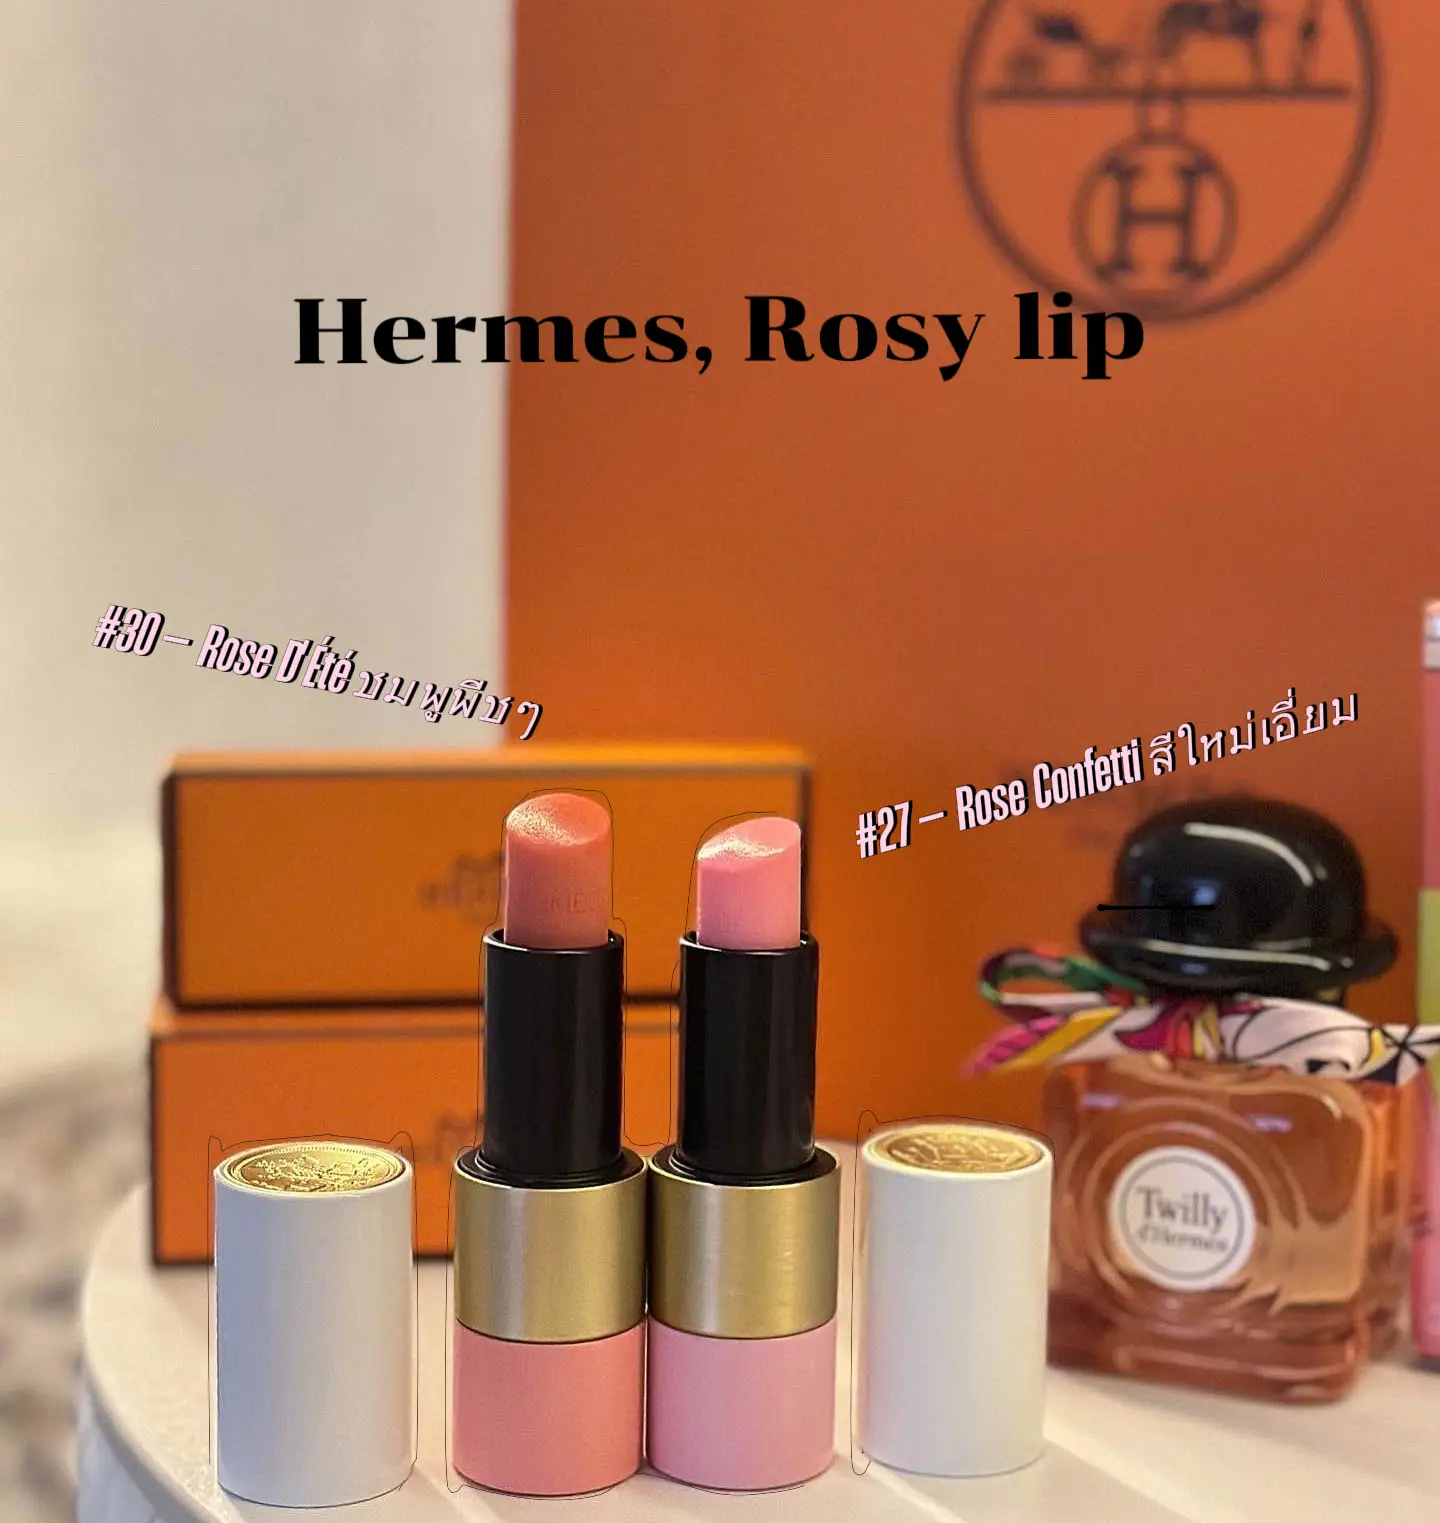 Hermes, Rosy lip, Gallery posted by GiftZy Pnwl